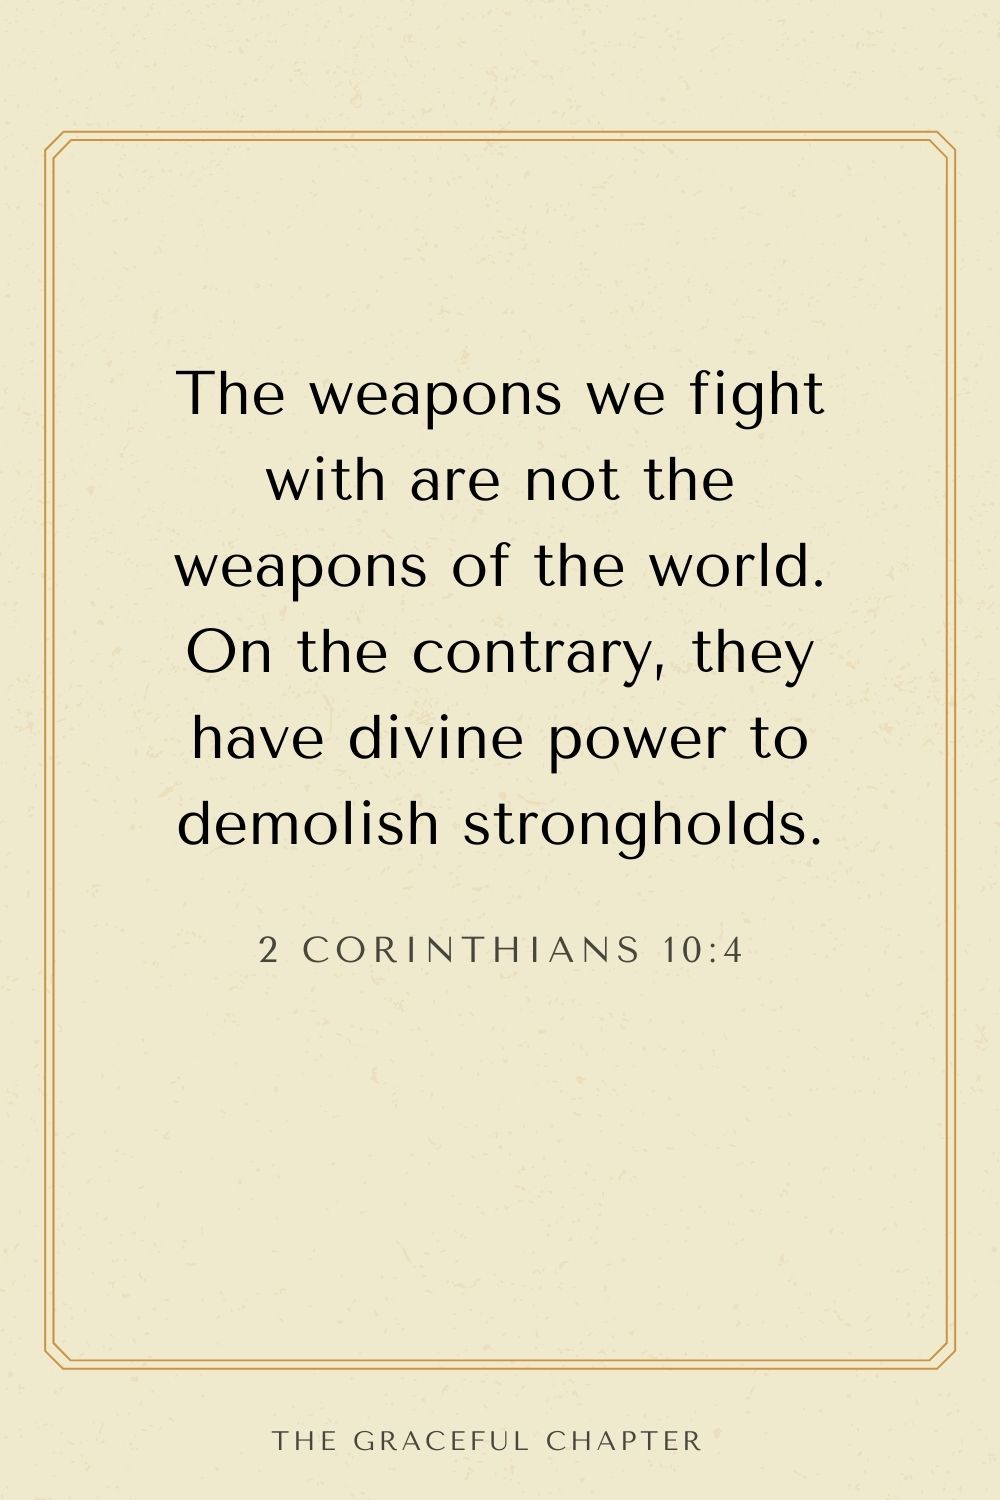 The weapons we fight with are not the weapons of the world. On the contrary, they have divine power to demolish strongholds. 2 Corinthians 10:4